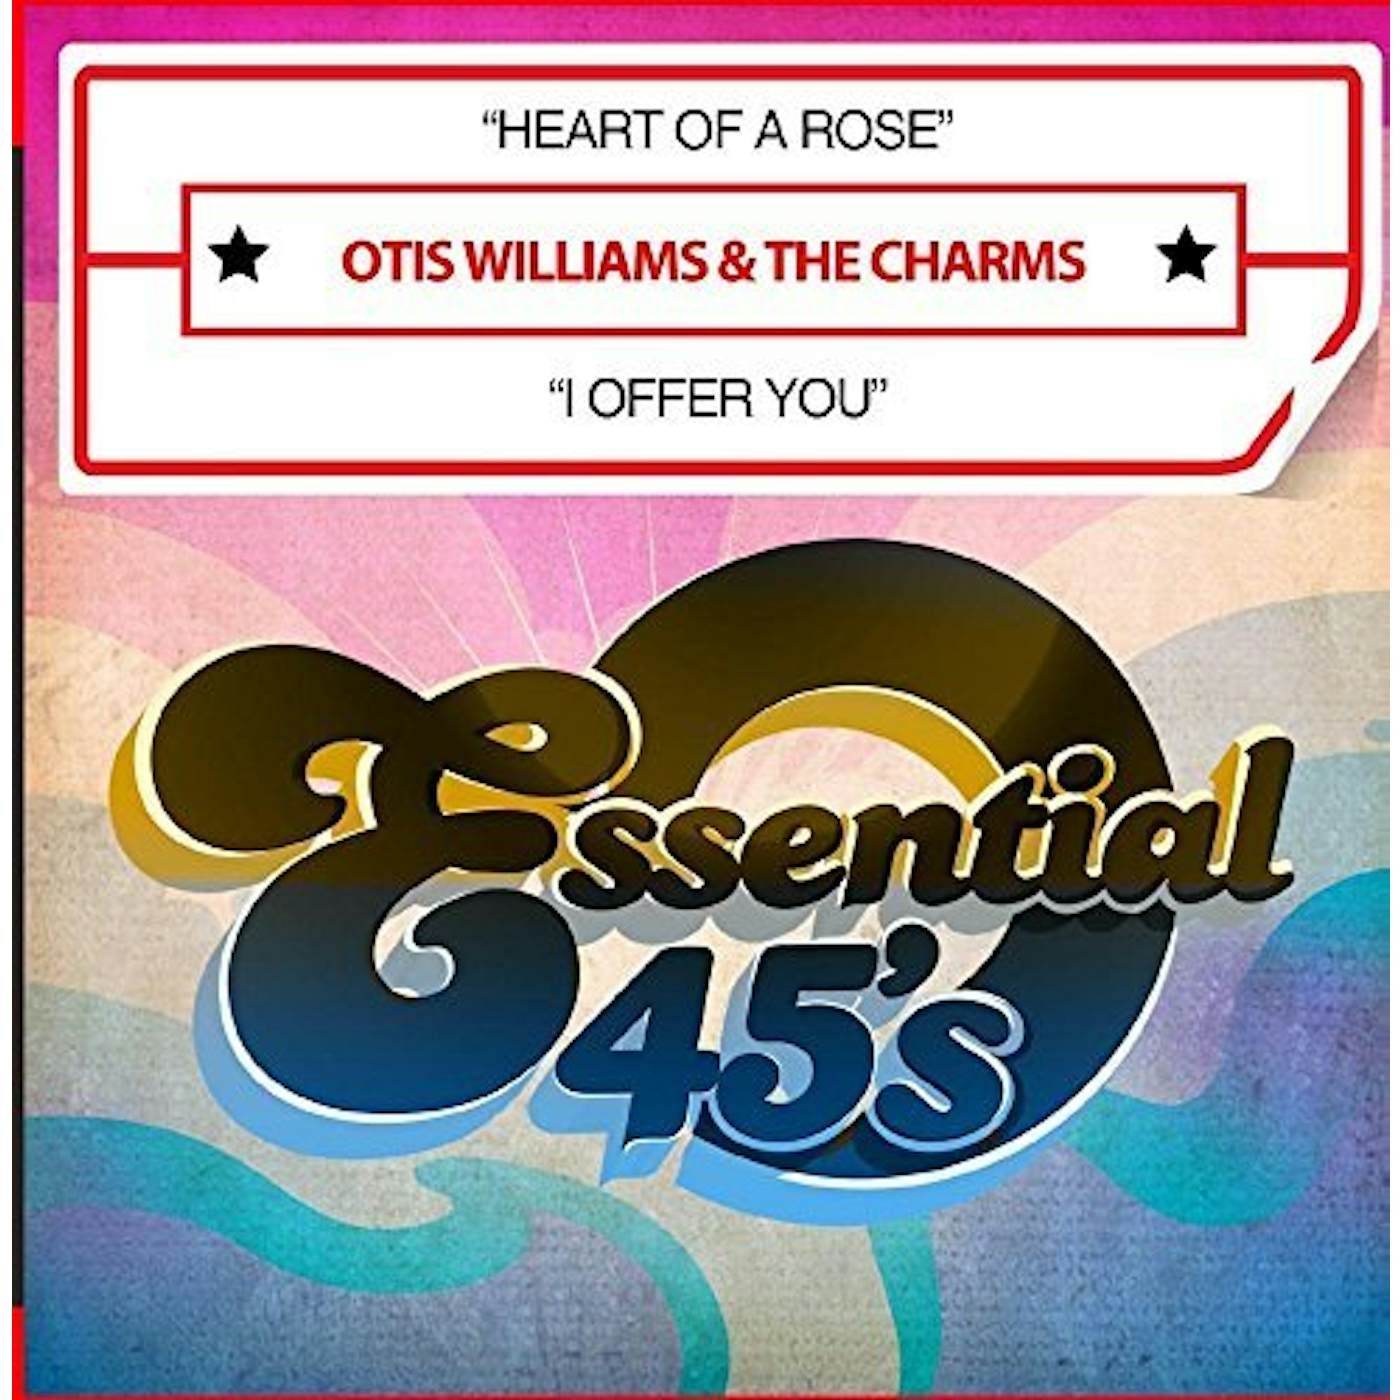 Otis Williams & The Charms HEART OF A ROSE / I OFFER YOU CD